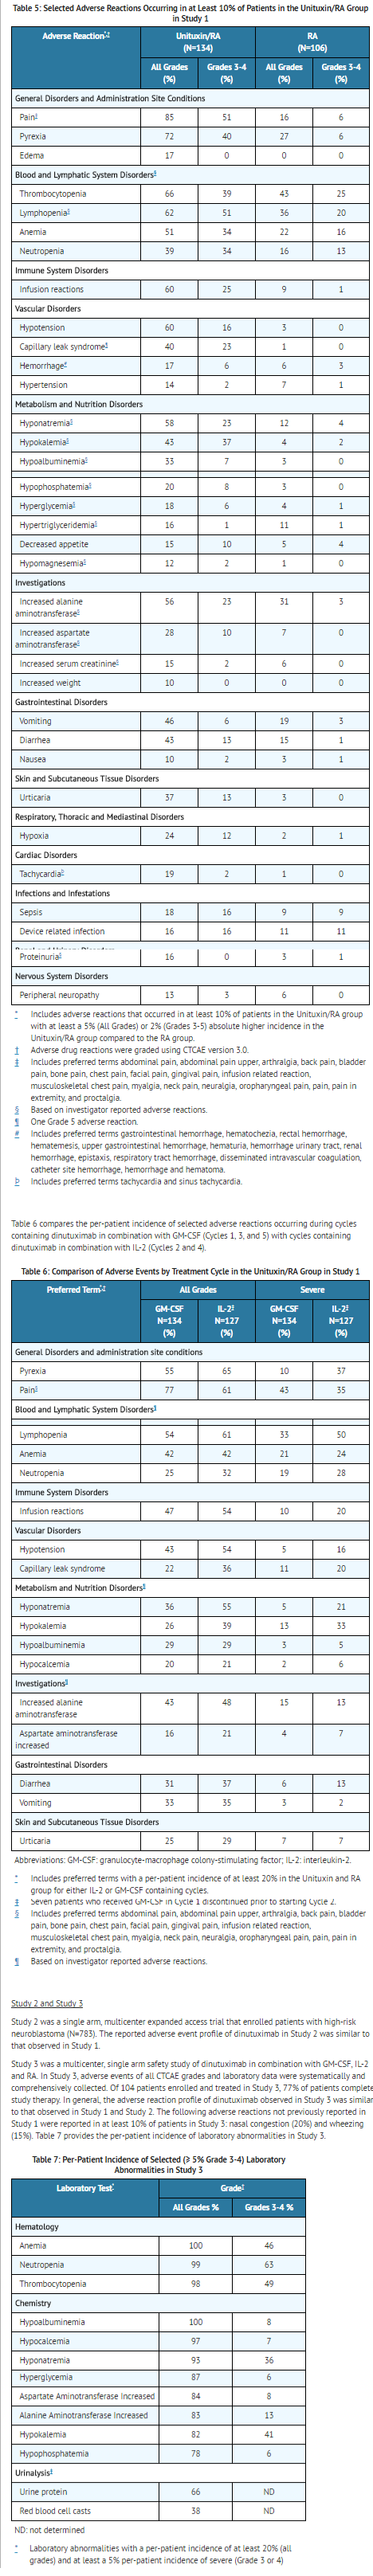 File:Table selected adverse effects.png